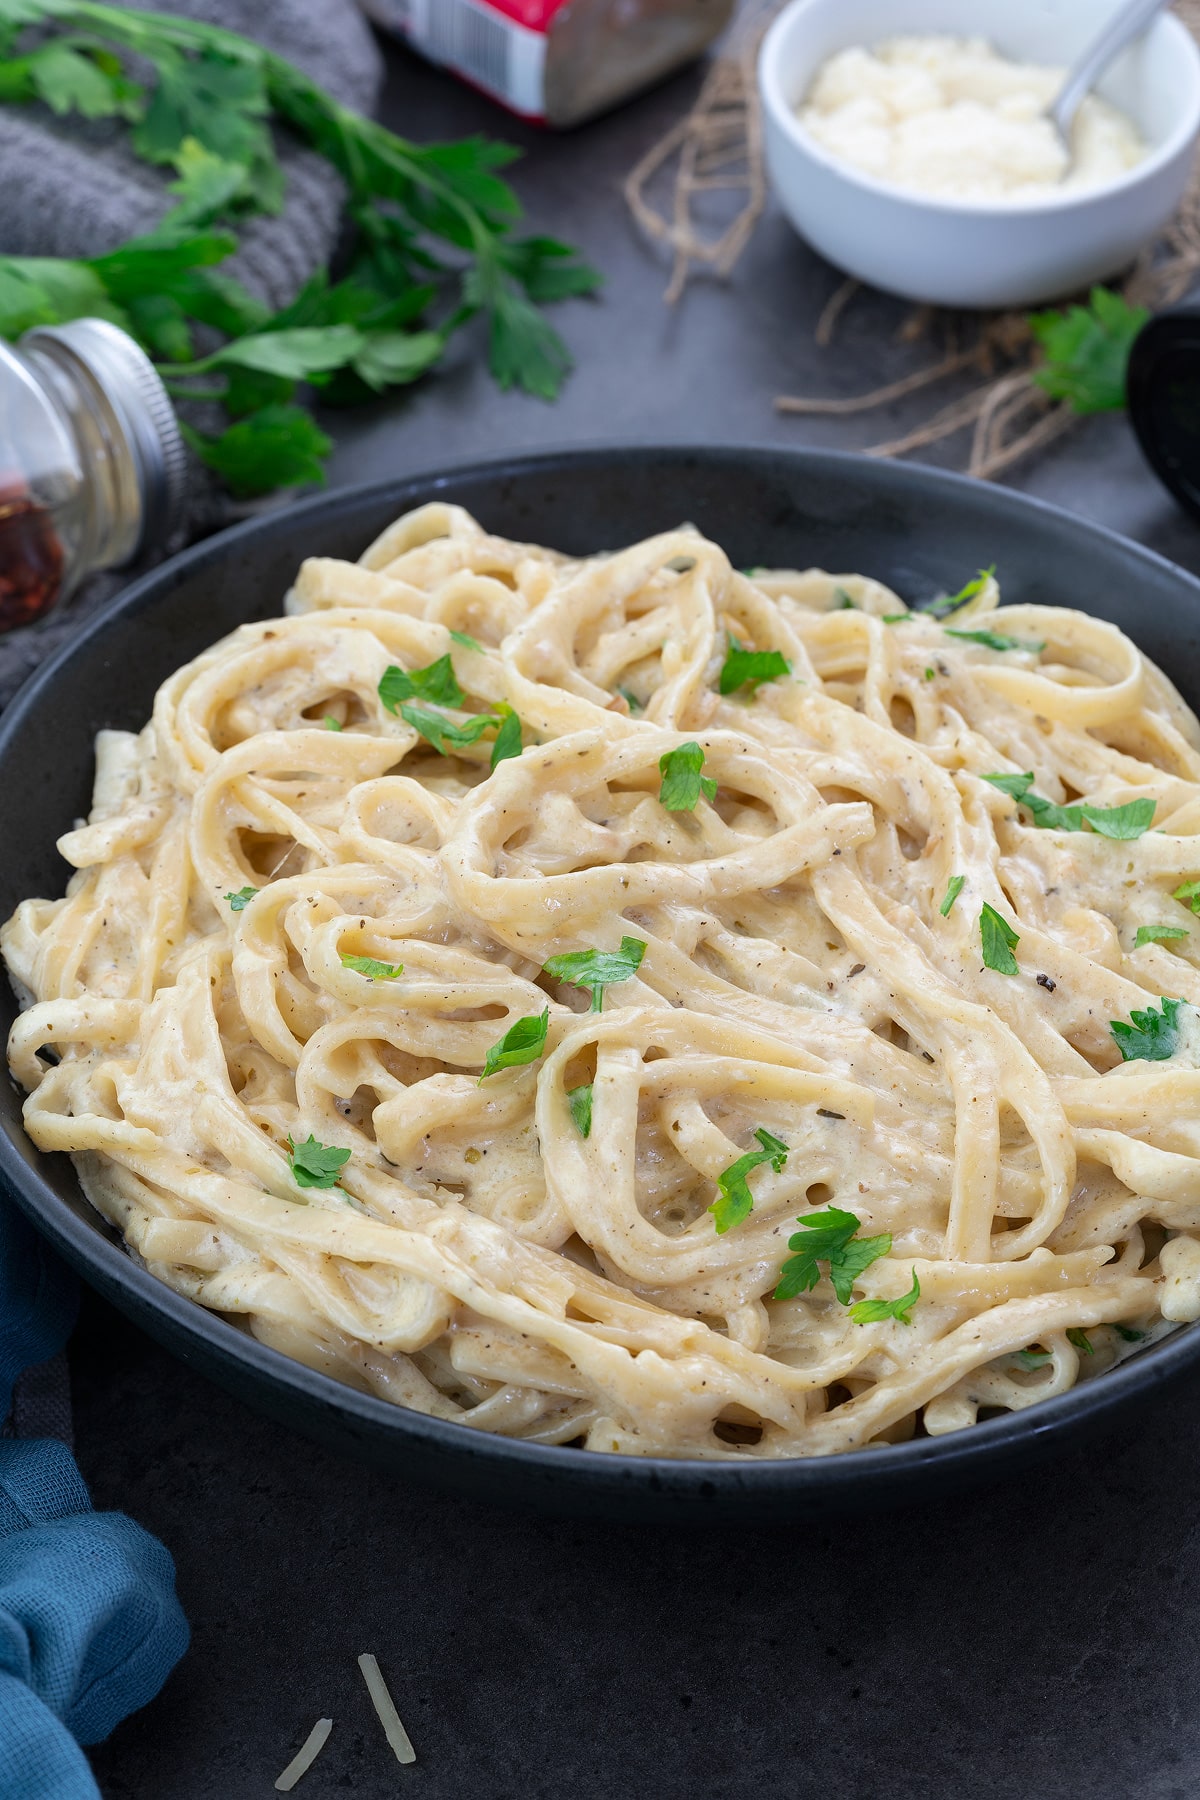 Fettuccine Alfredo Pasta in a black bowl placed on a grey table.